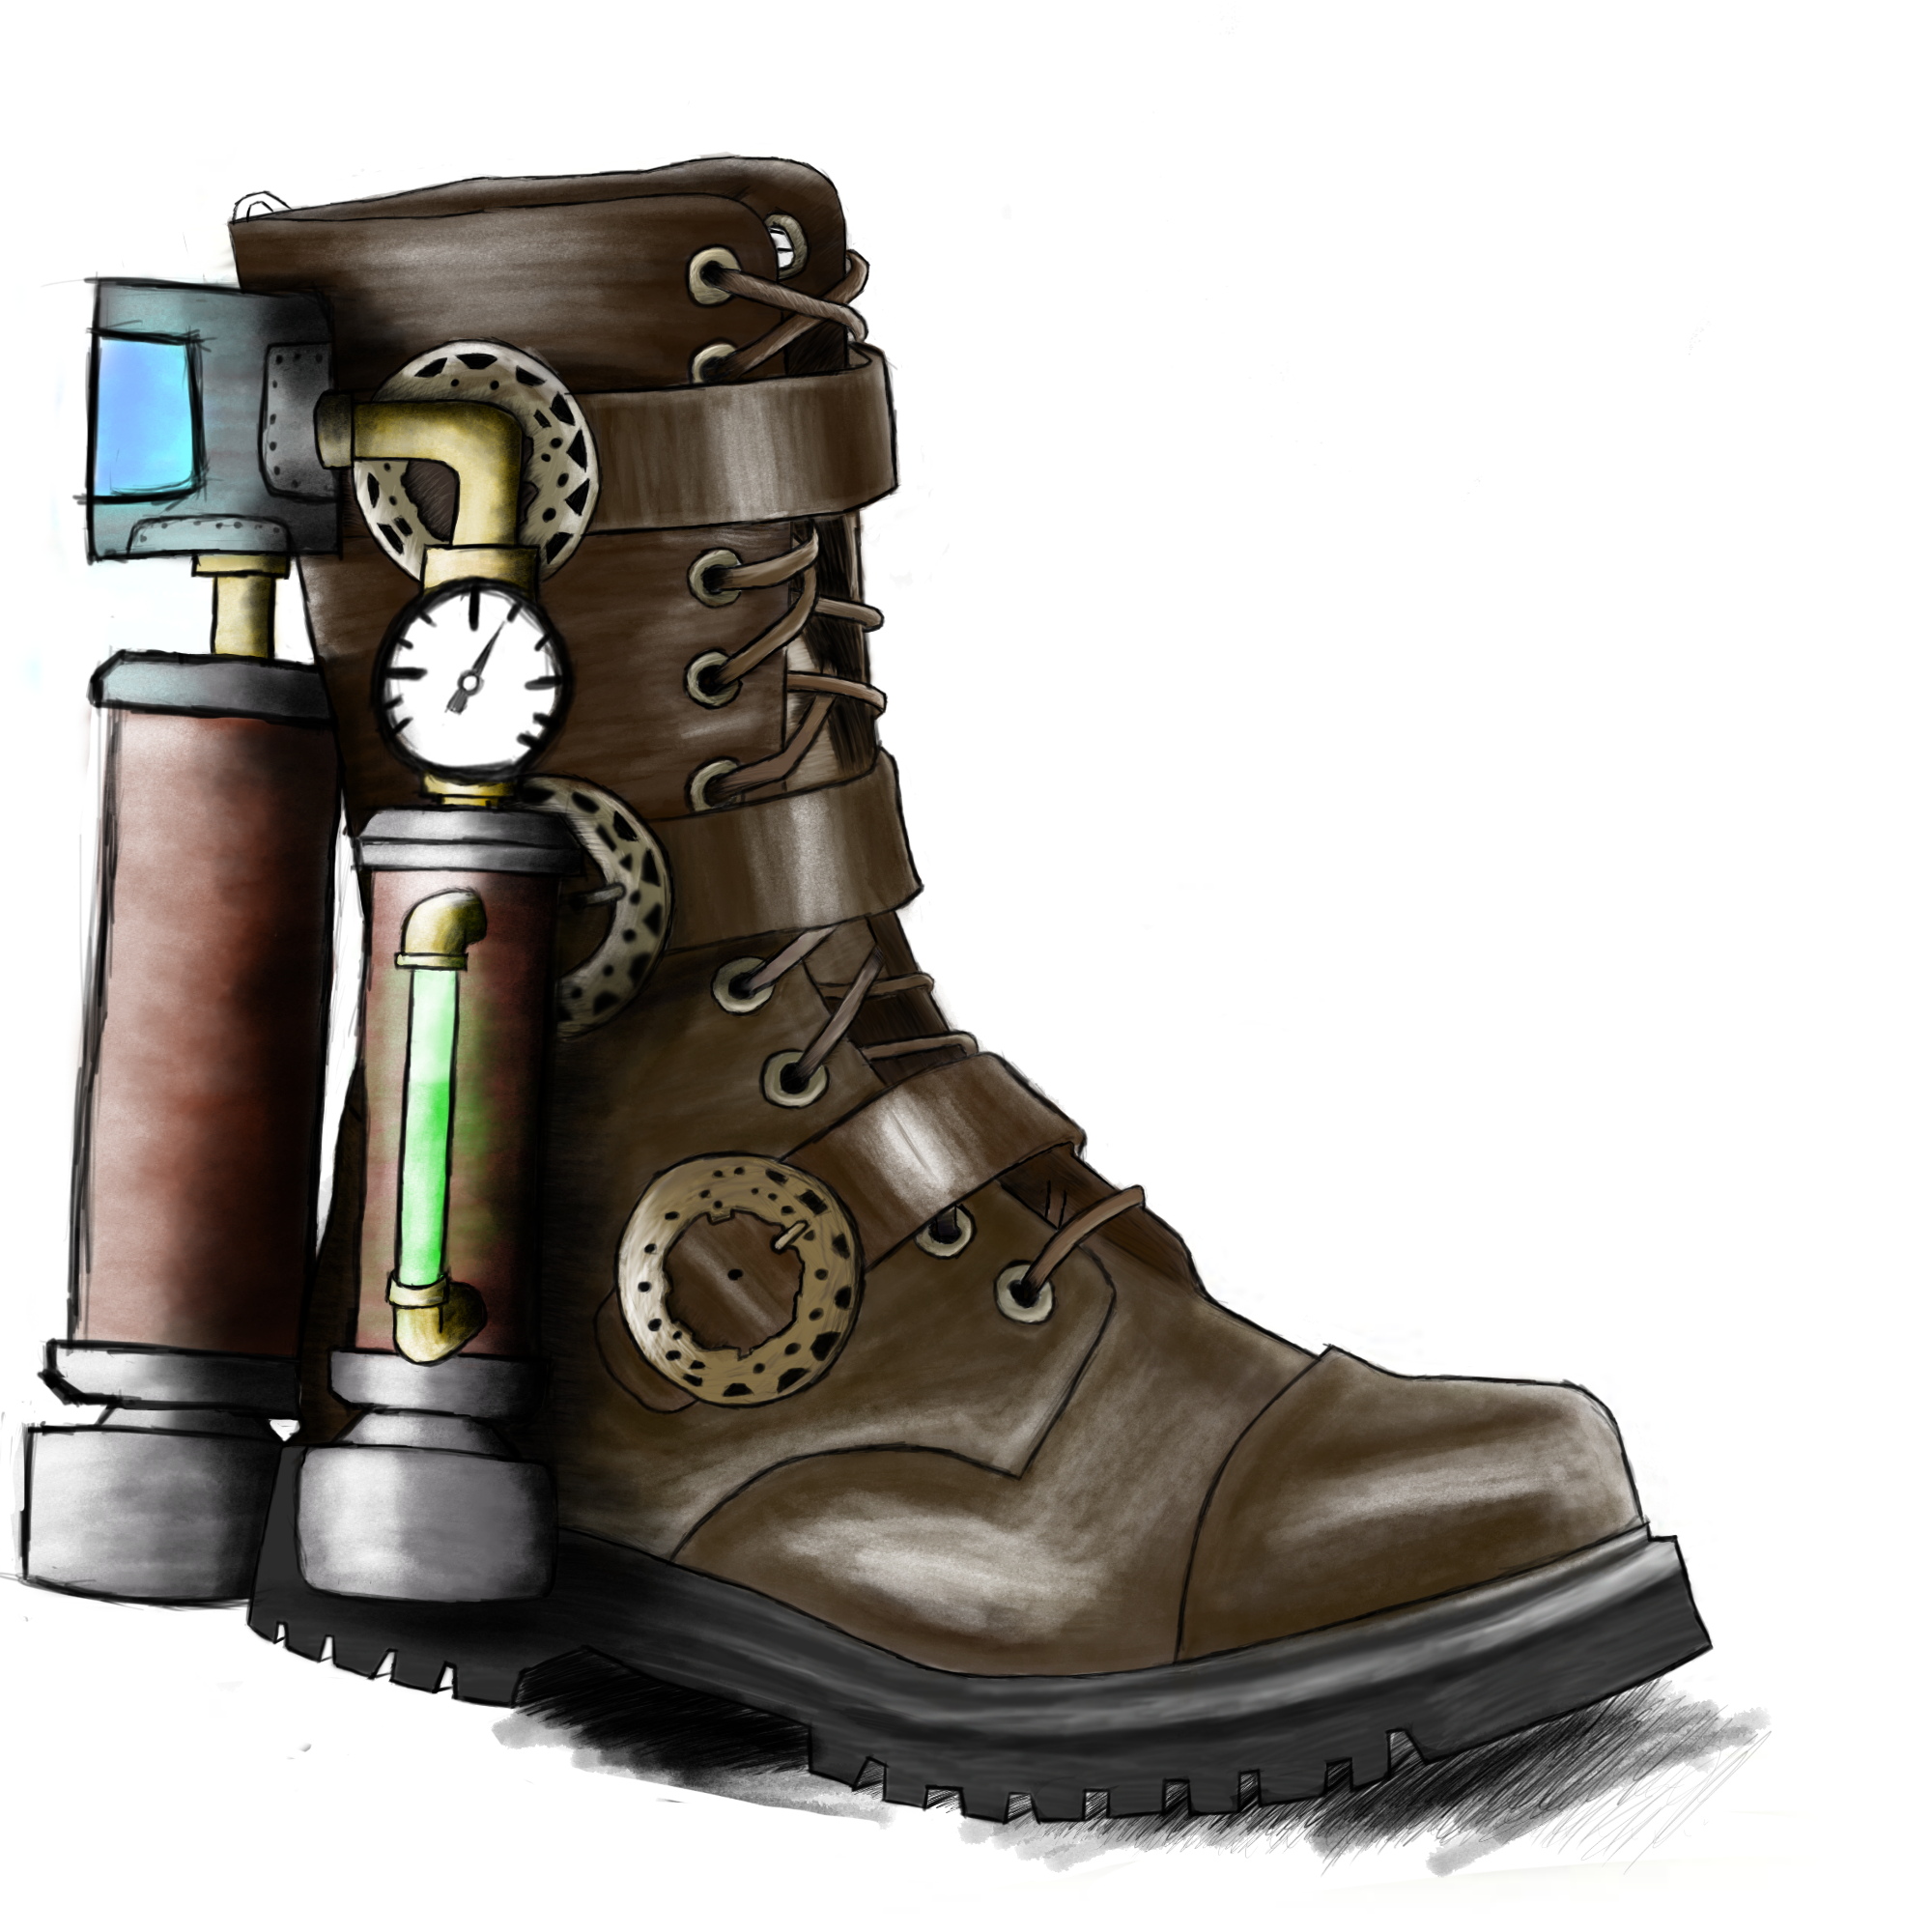 rocket_boot_finished_by_sxnolan-d4wi0gy.png